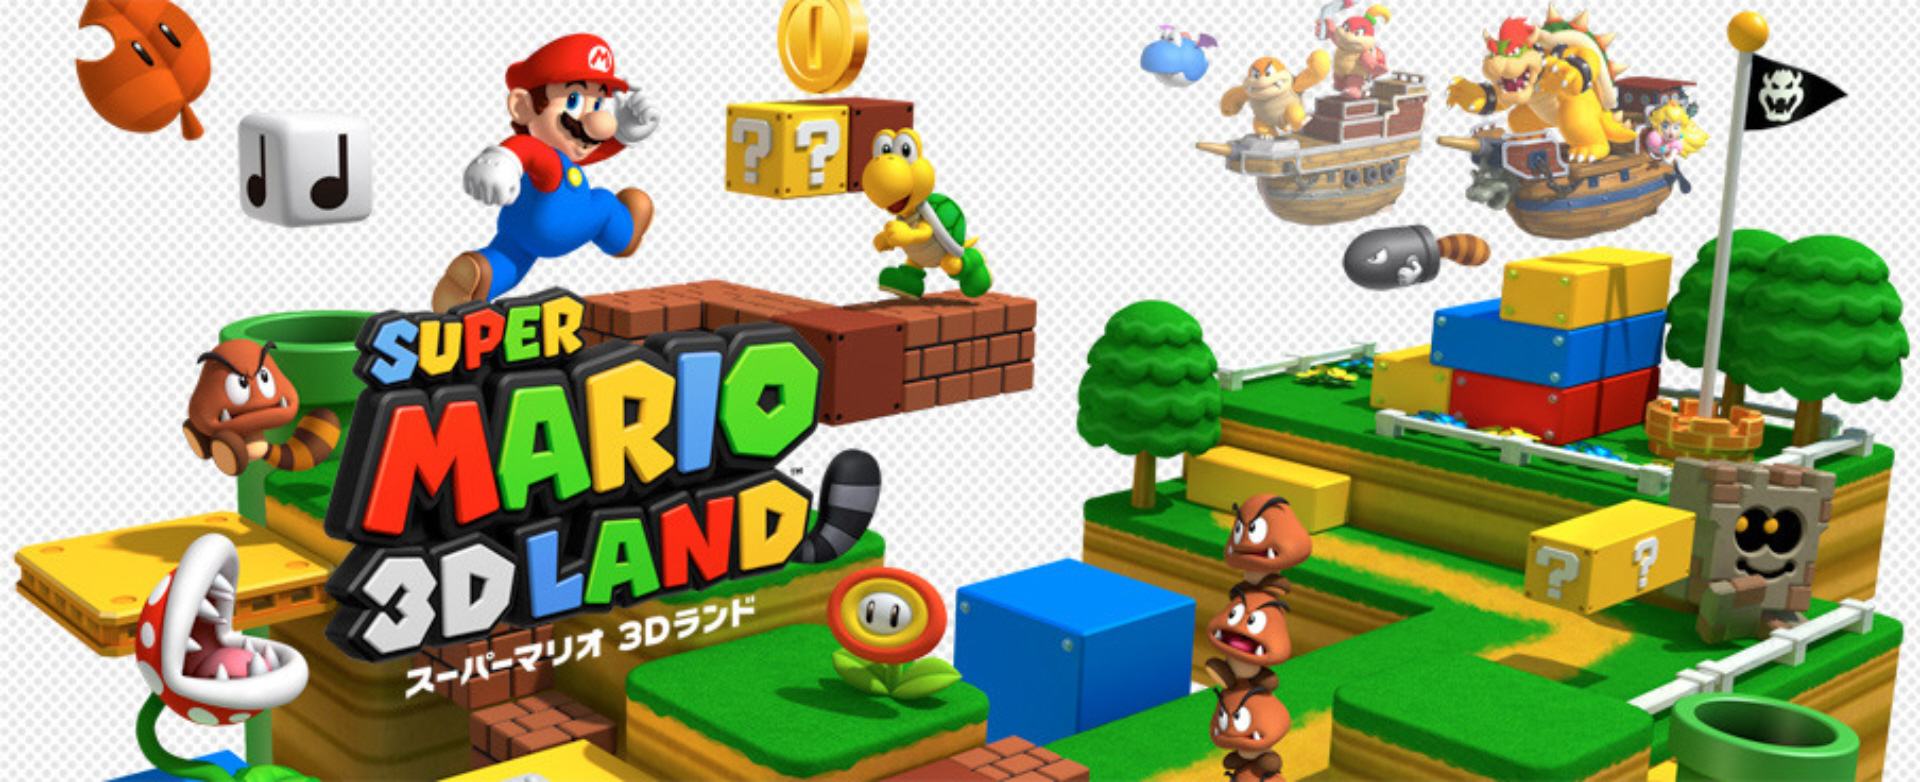 Super Mario 3d Land Wallpaper Cast Of Characters And Enemies